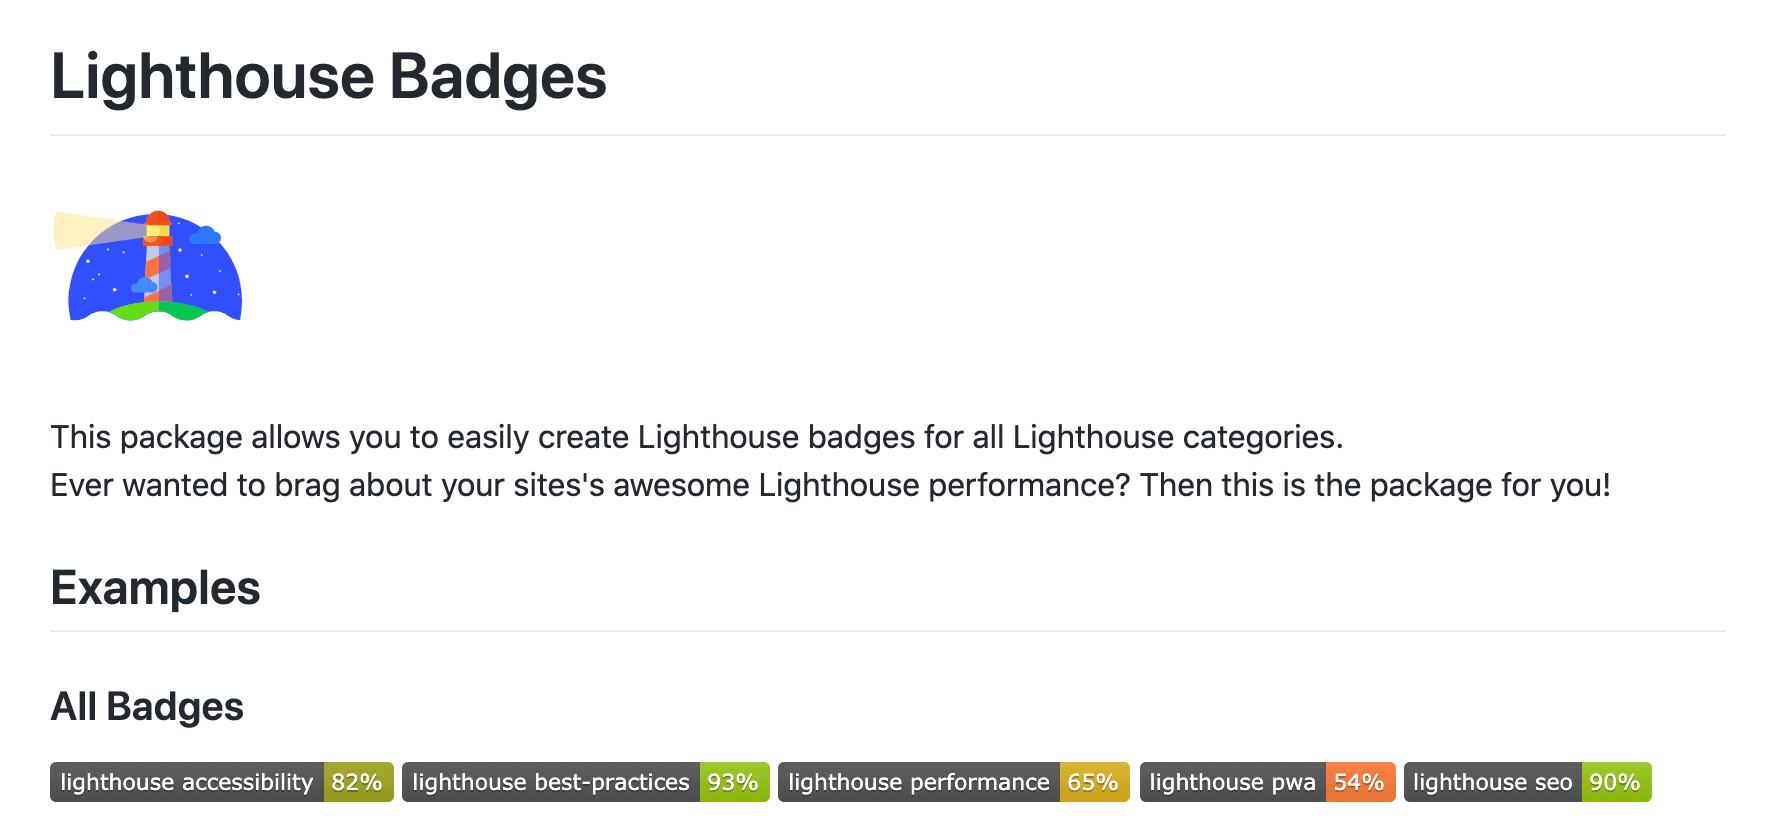 A screenshot of a github repo that offers Lighthouse badges for your repository or website so you can brag about your site's awesome Lighthouse performance